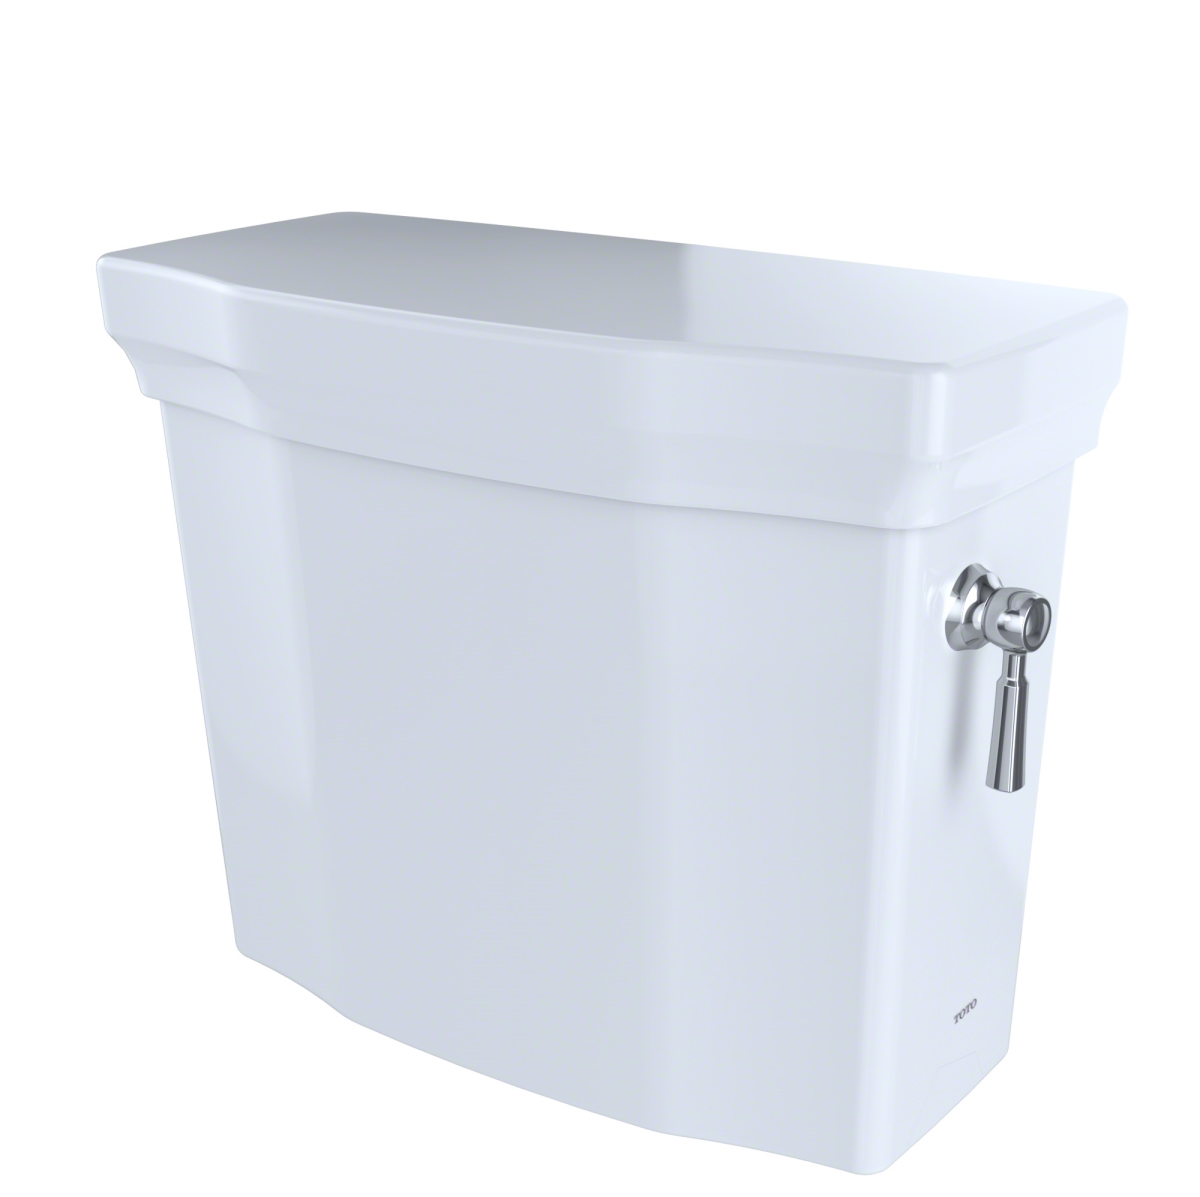 St403erno.01 Promenade Ii 1.28 Gpf Toilet Tank With Right-hand Trip Lever, Cotton White